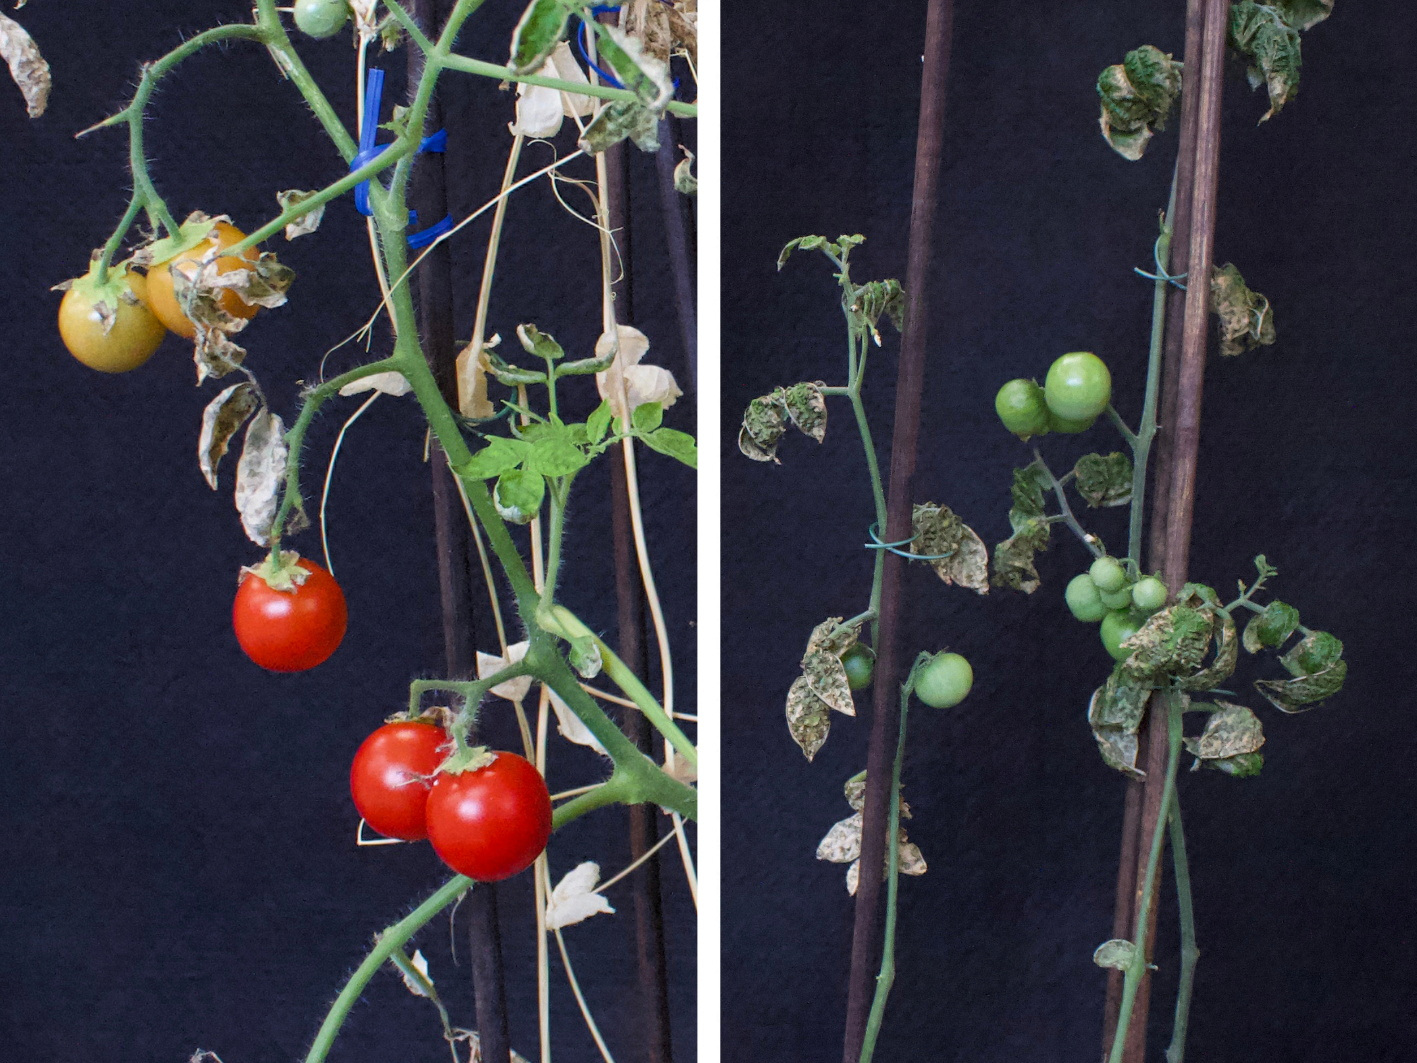 Cherry tomatoes grown in Mars regolith simulant under 'intercropping' conditions (left) look much better than those in 'monocropping' conditions. /Rebeca Goncalves/Reuters